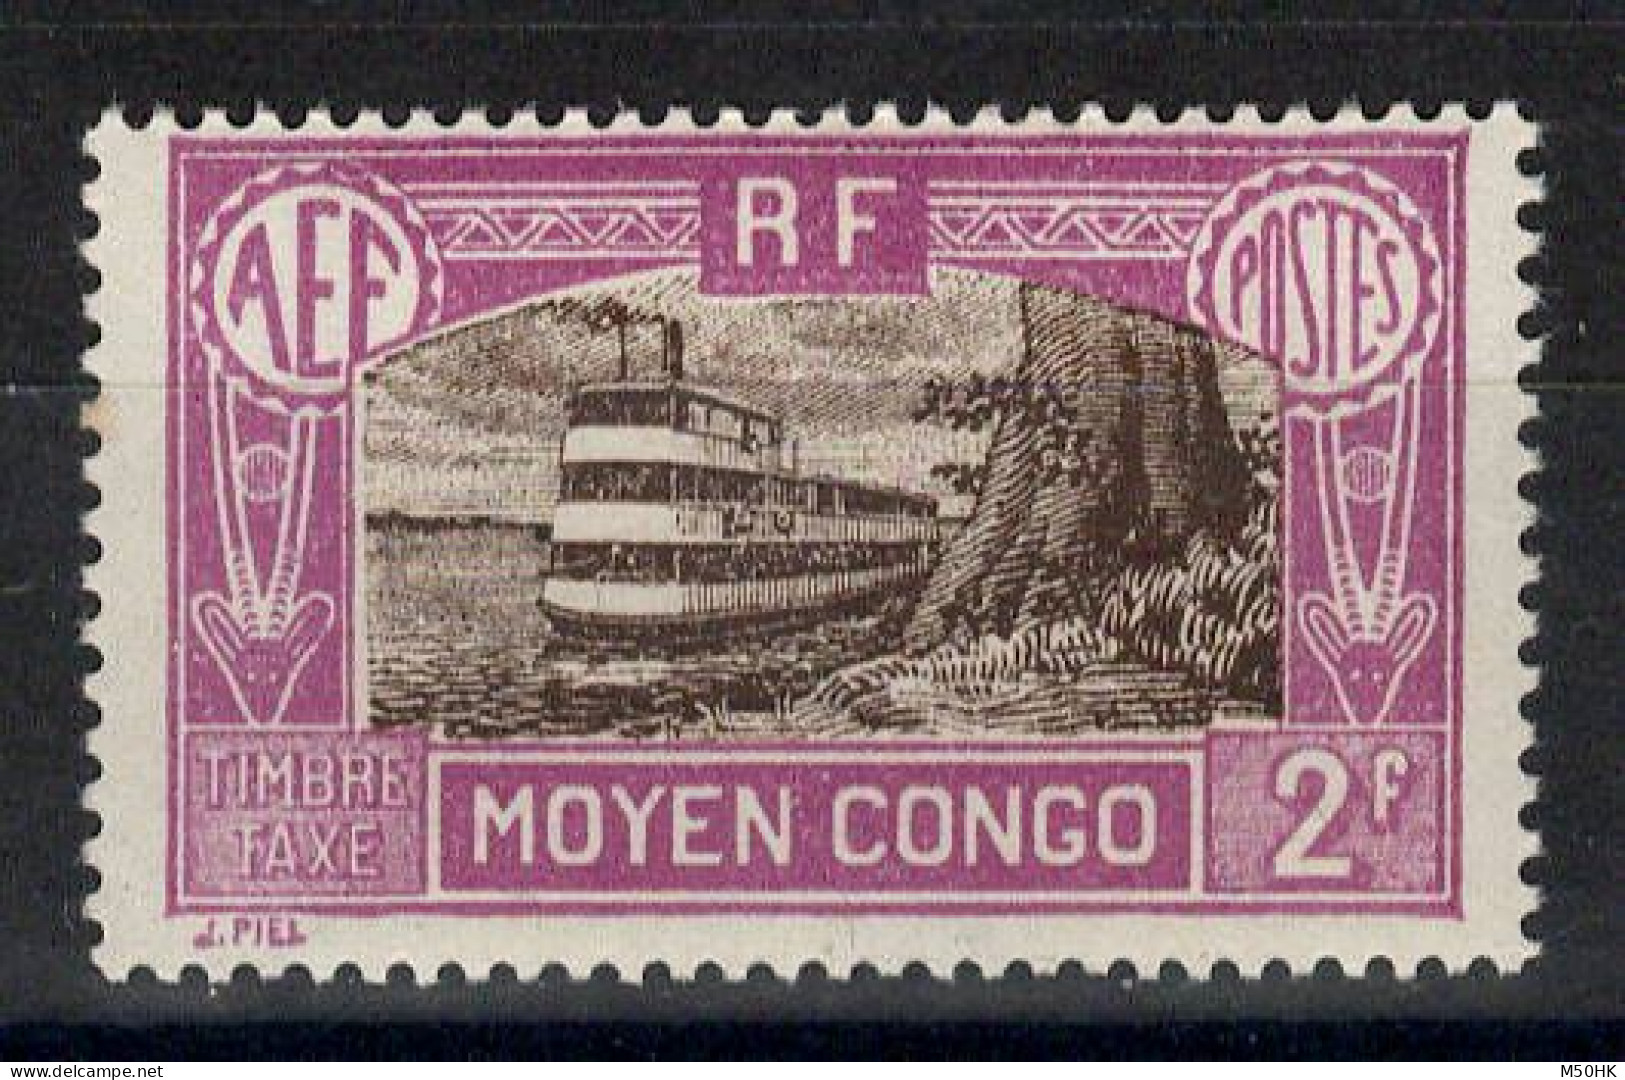 Congo - Taxe YV 21 N* MH , Cote 18 Euros - Unused Stamps